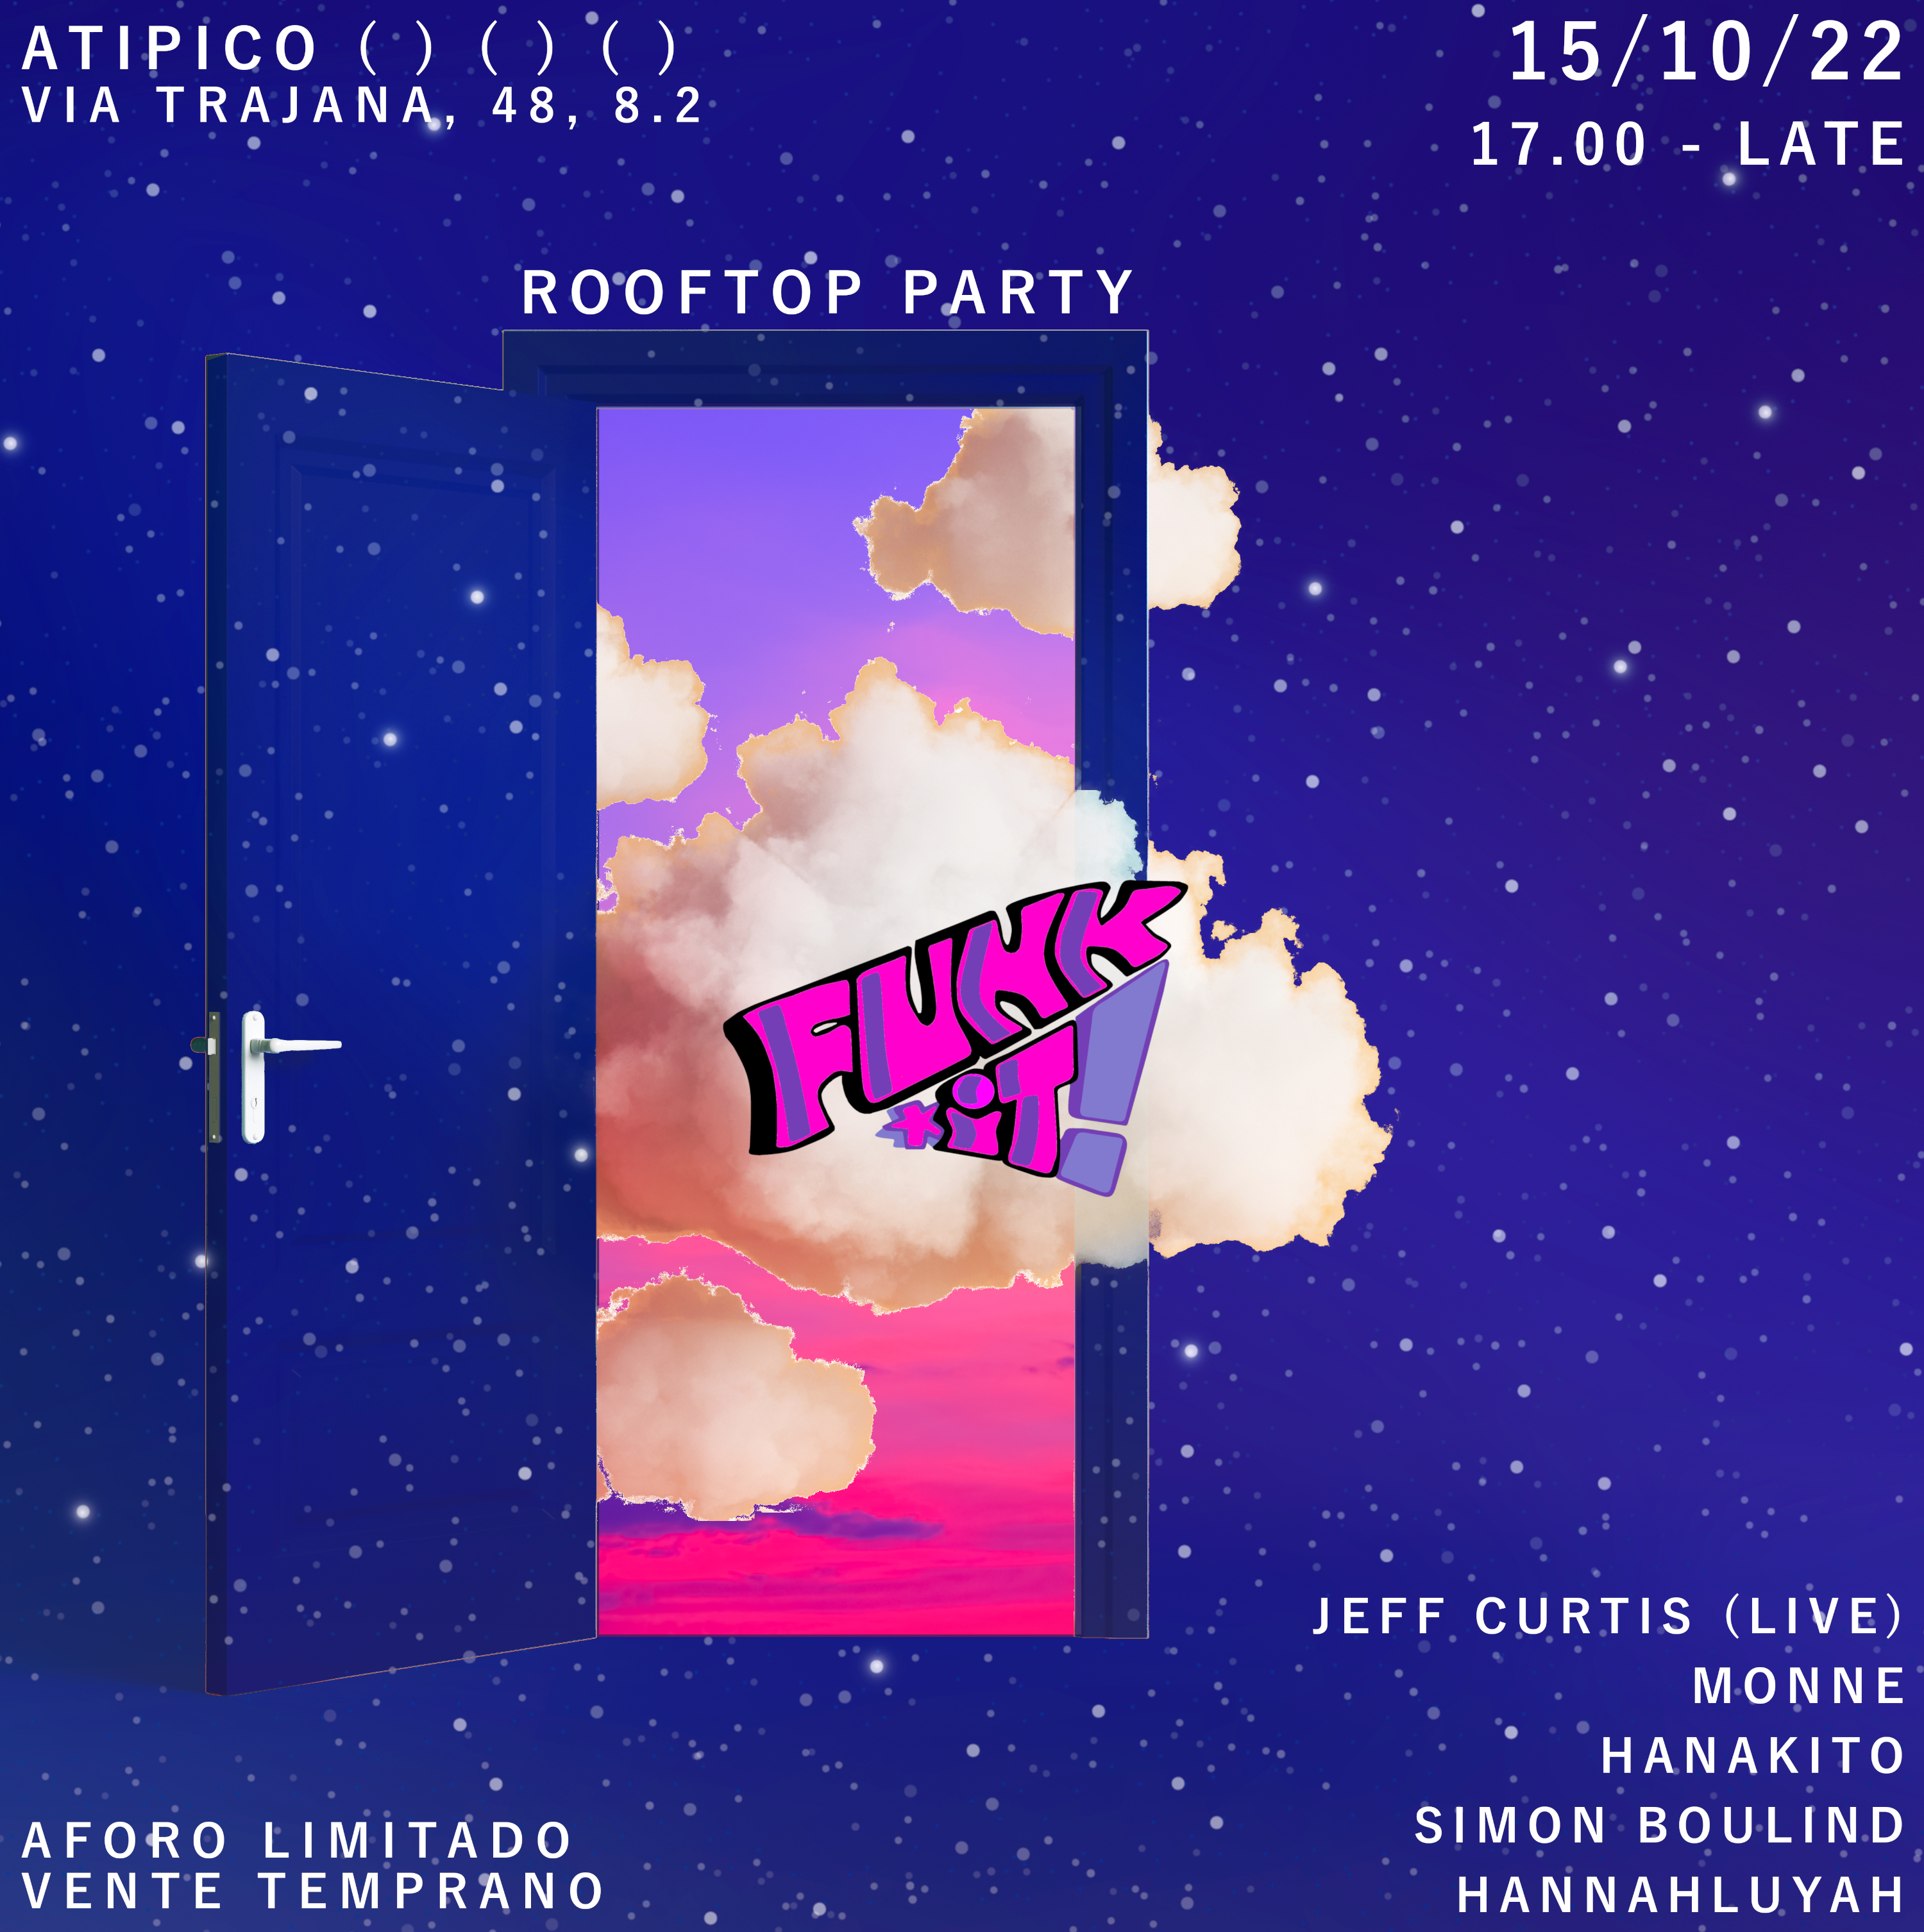 Funk It! Rooftop Party at Atipico [Free Entry] - フライヤー表